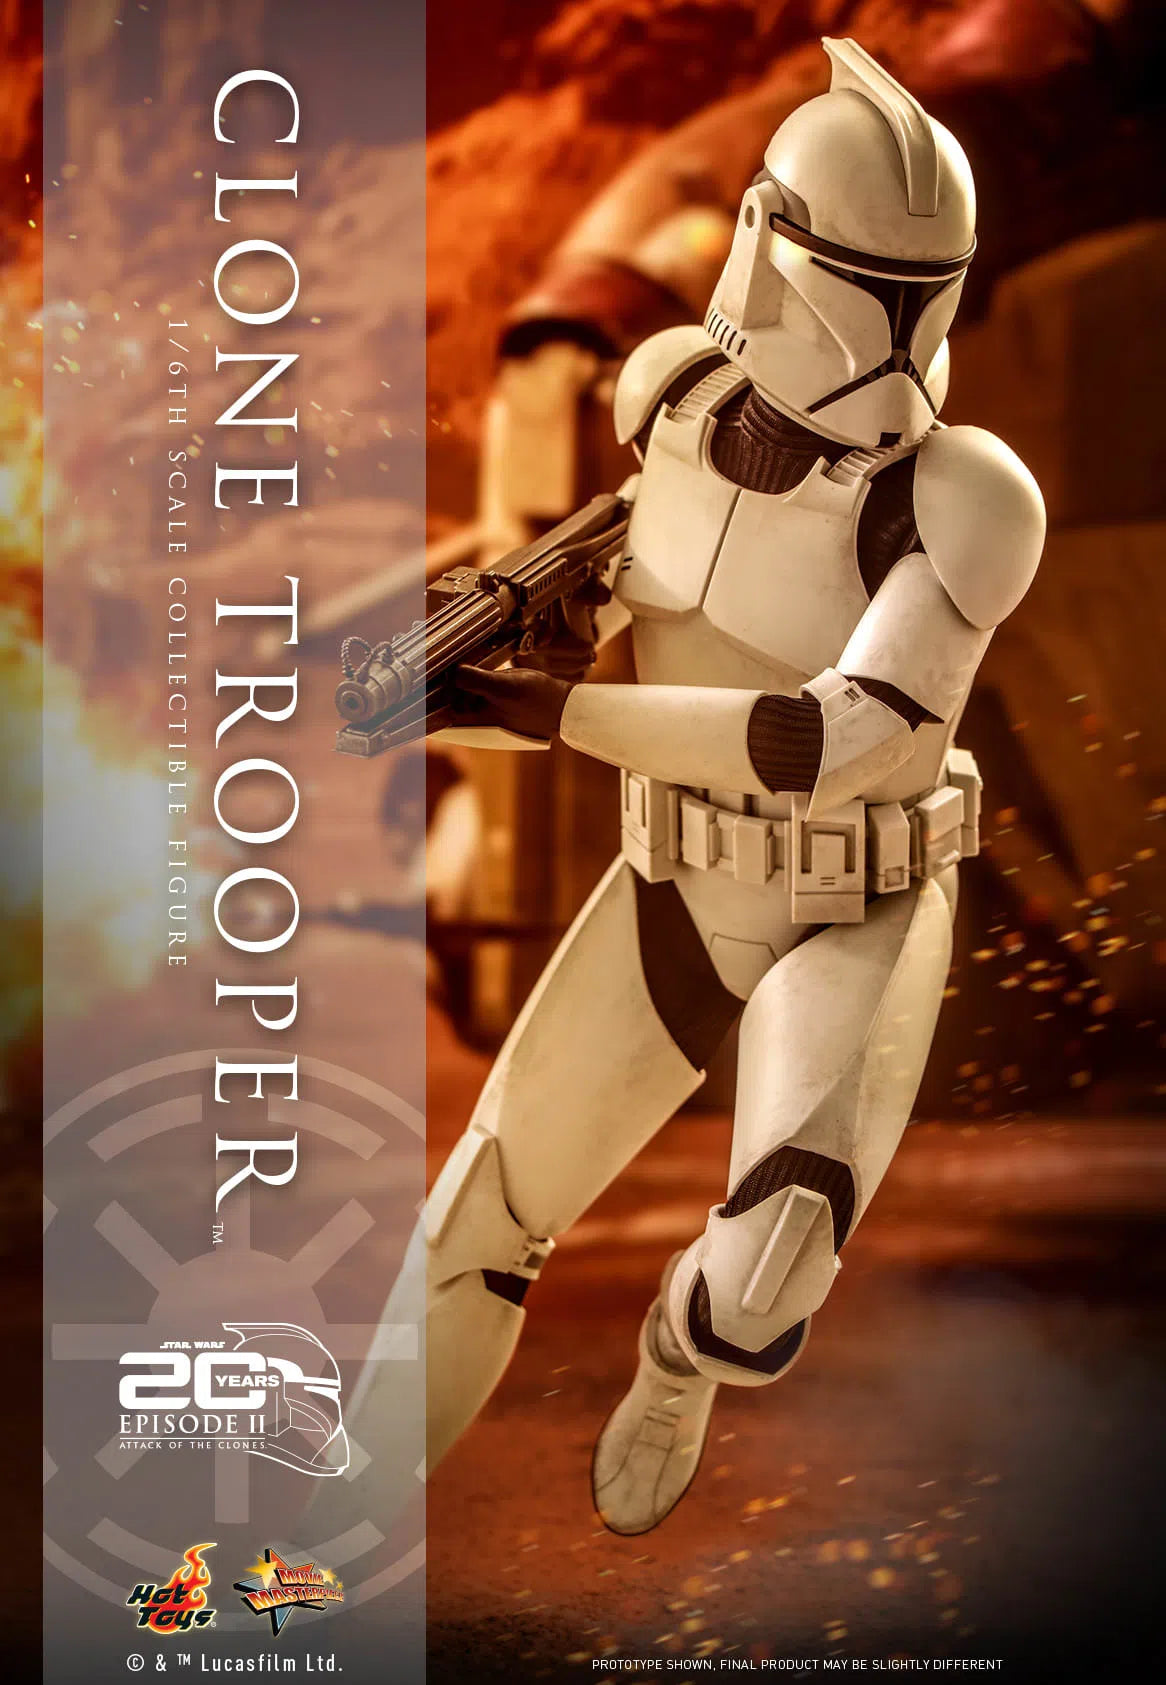 Clone Trooper: Star Wars: Attack Of The Clones: MMS647: Hot Toys